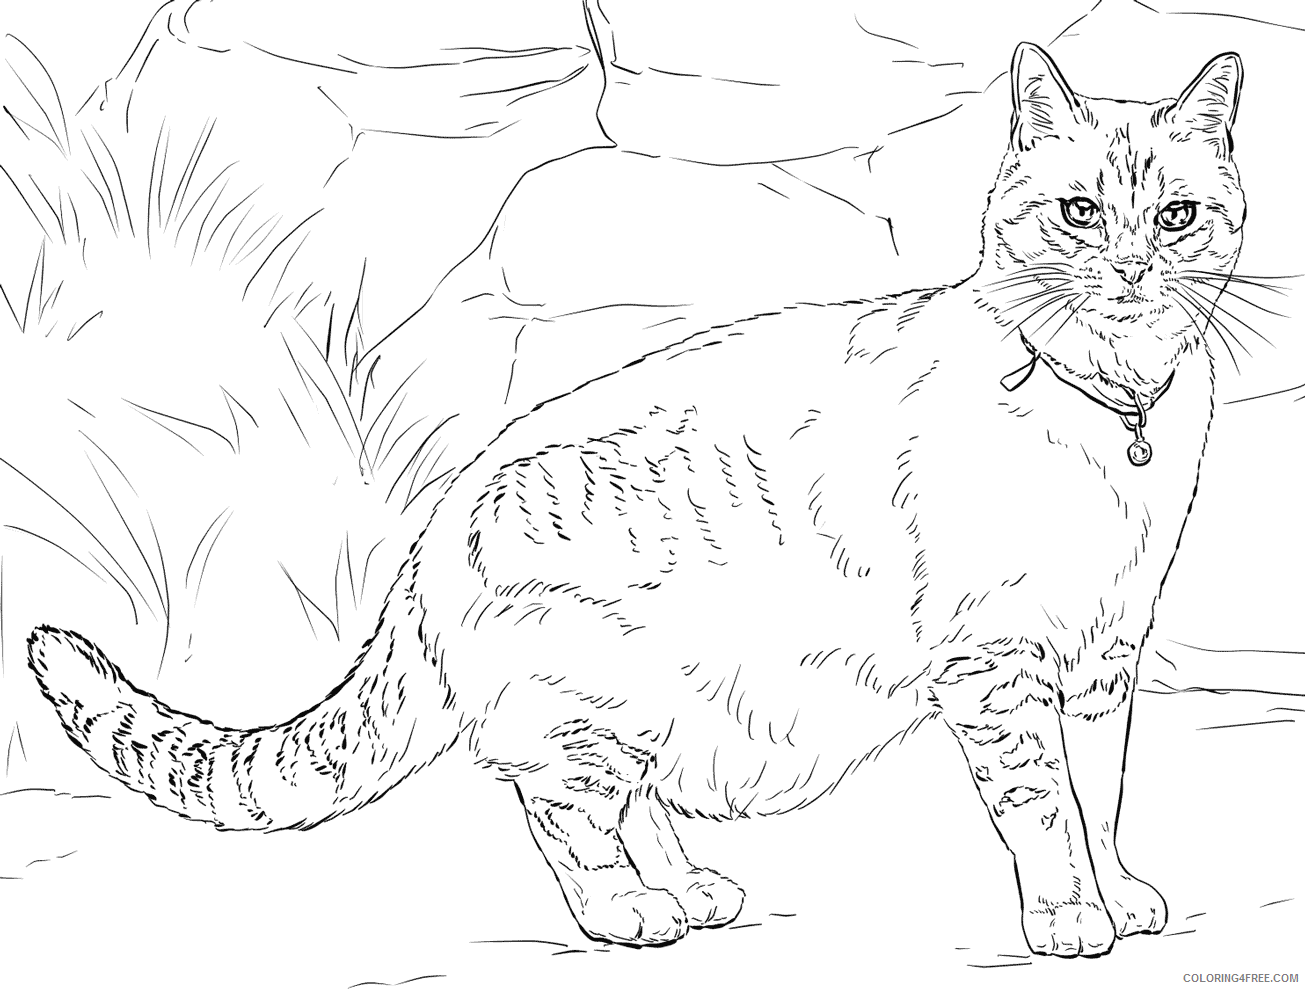 Adult Cat Coloring Pages Realist Adult Cat Printable 2020 217 Coloring4free